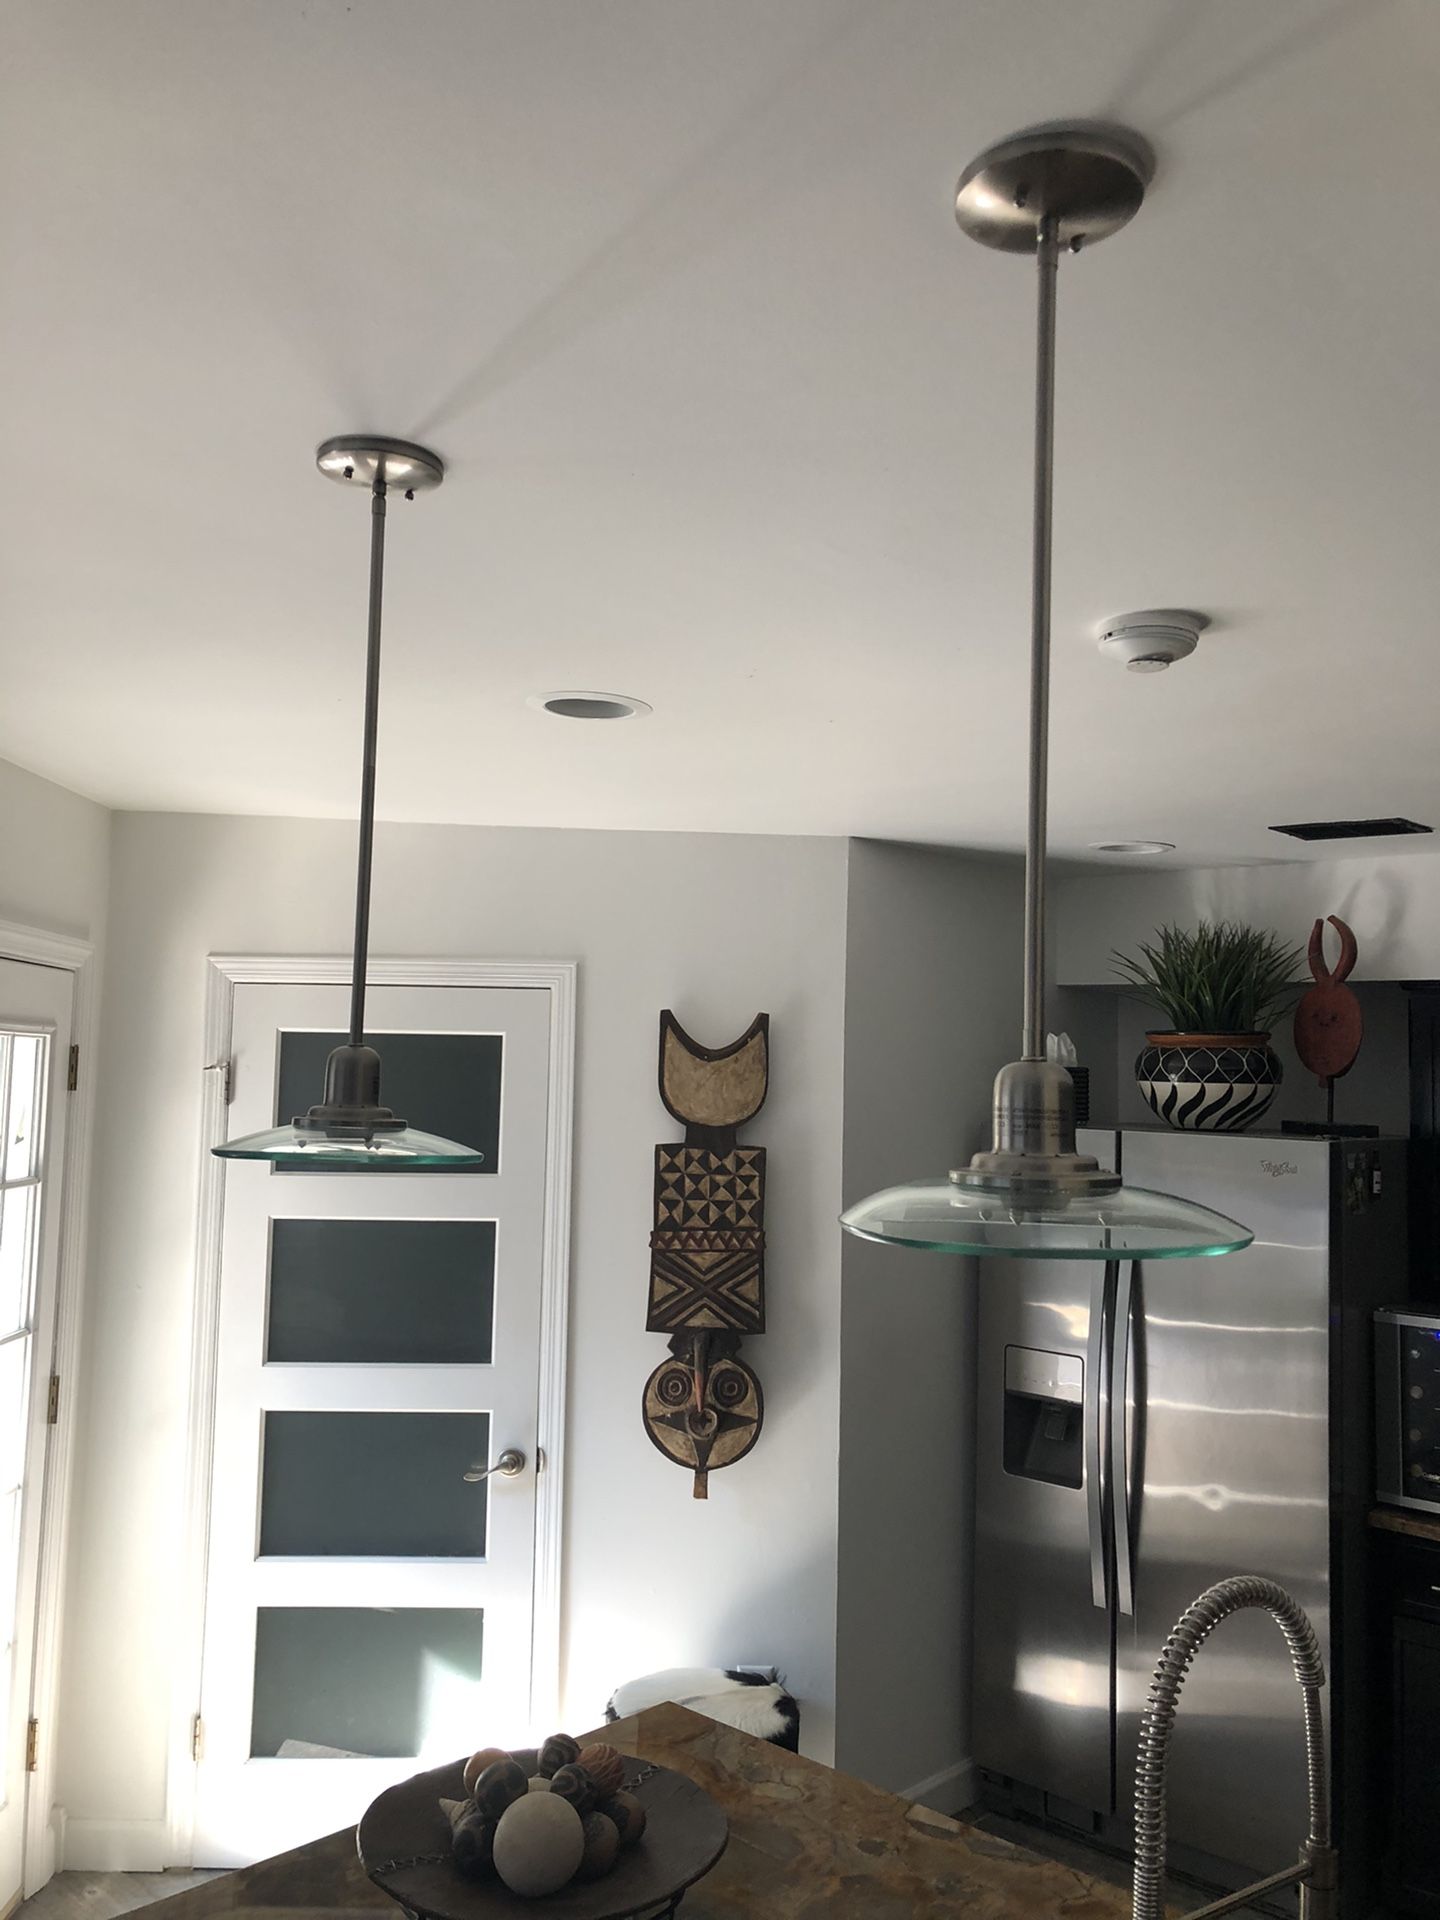 (2) Contemporary Brushed Nickel Pendant Lights, $80 For Both